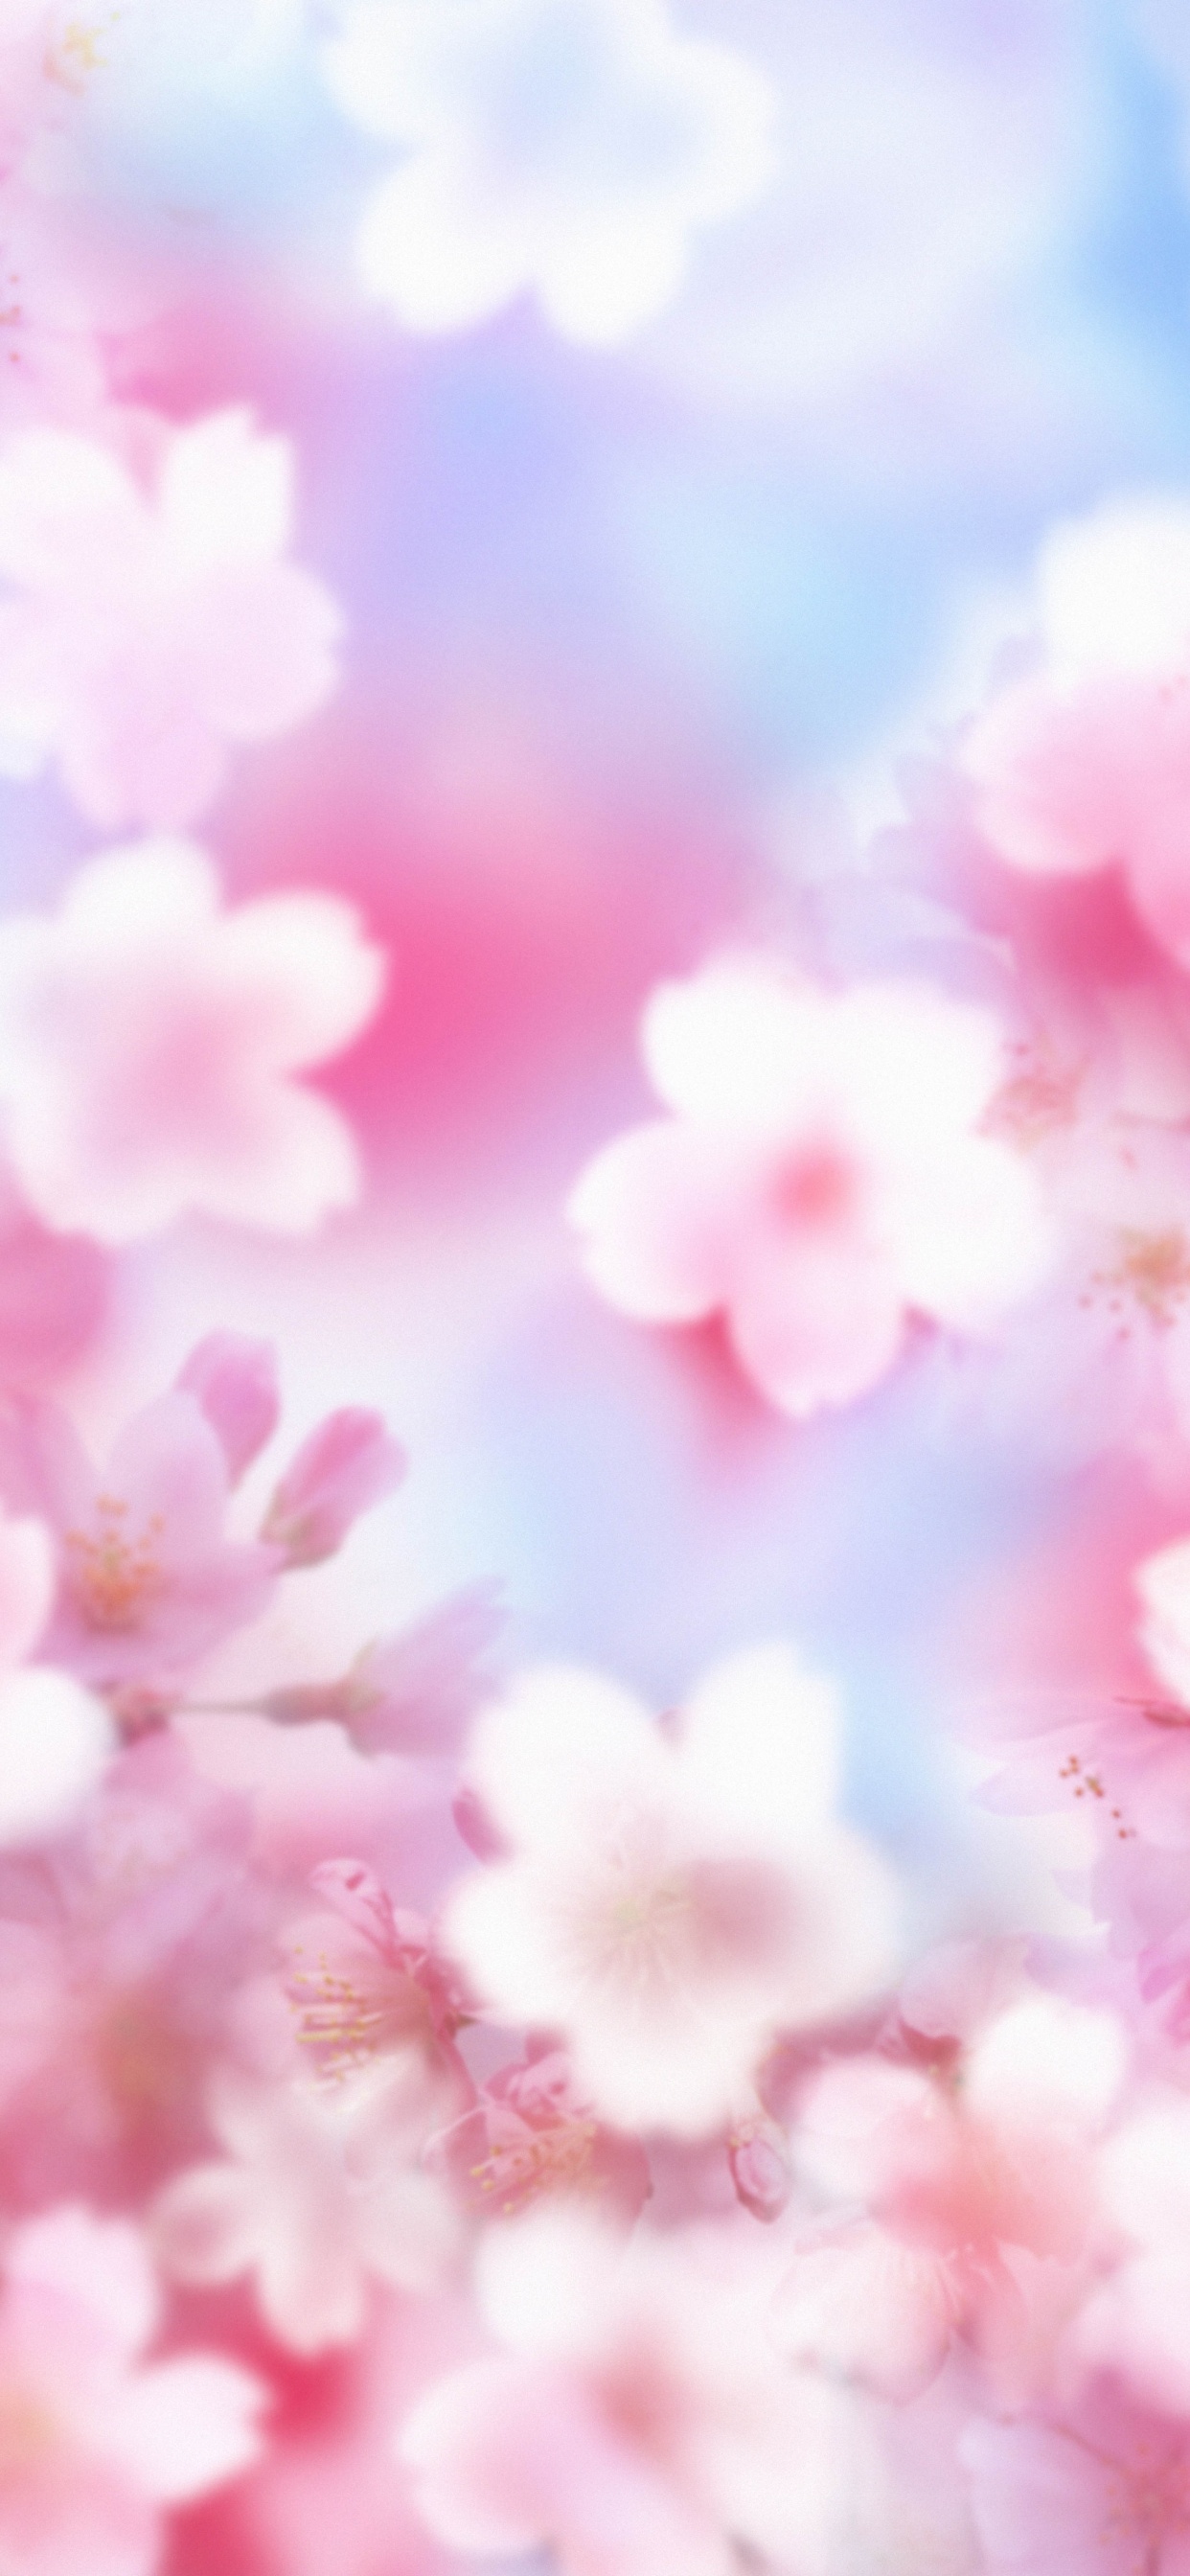 Pink Cherry Blossom Under Blue Sky During Daytime. Wallpaper in 1242x2688 Resolution